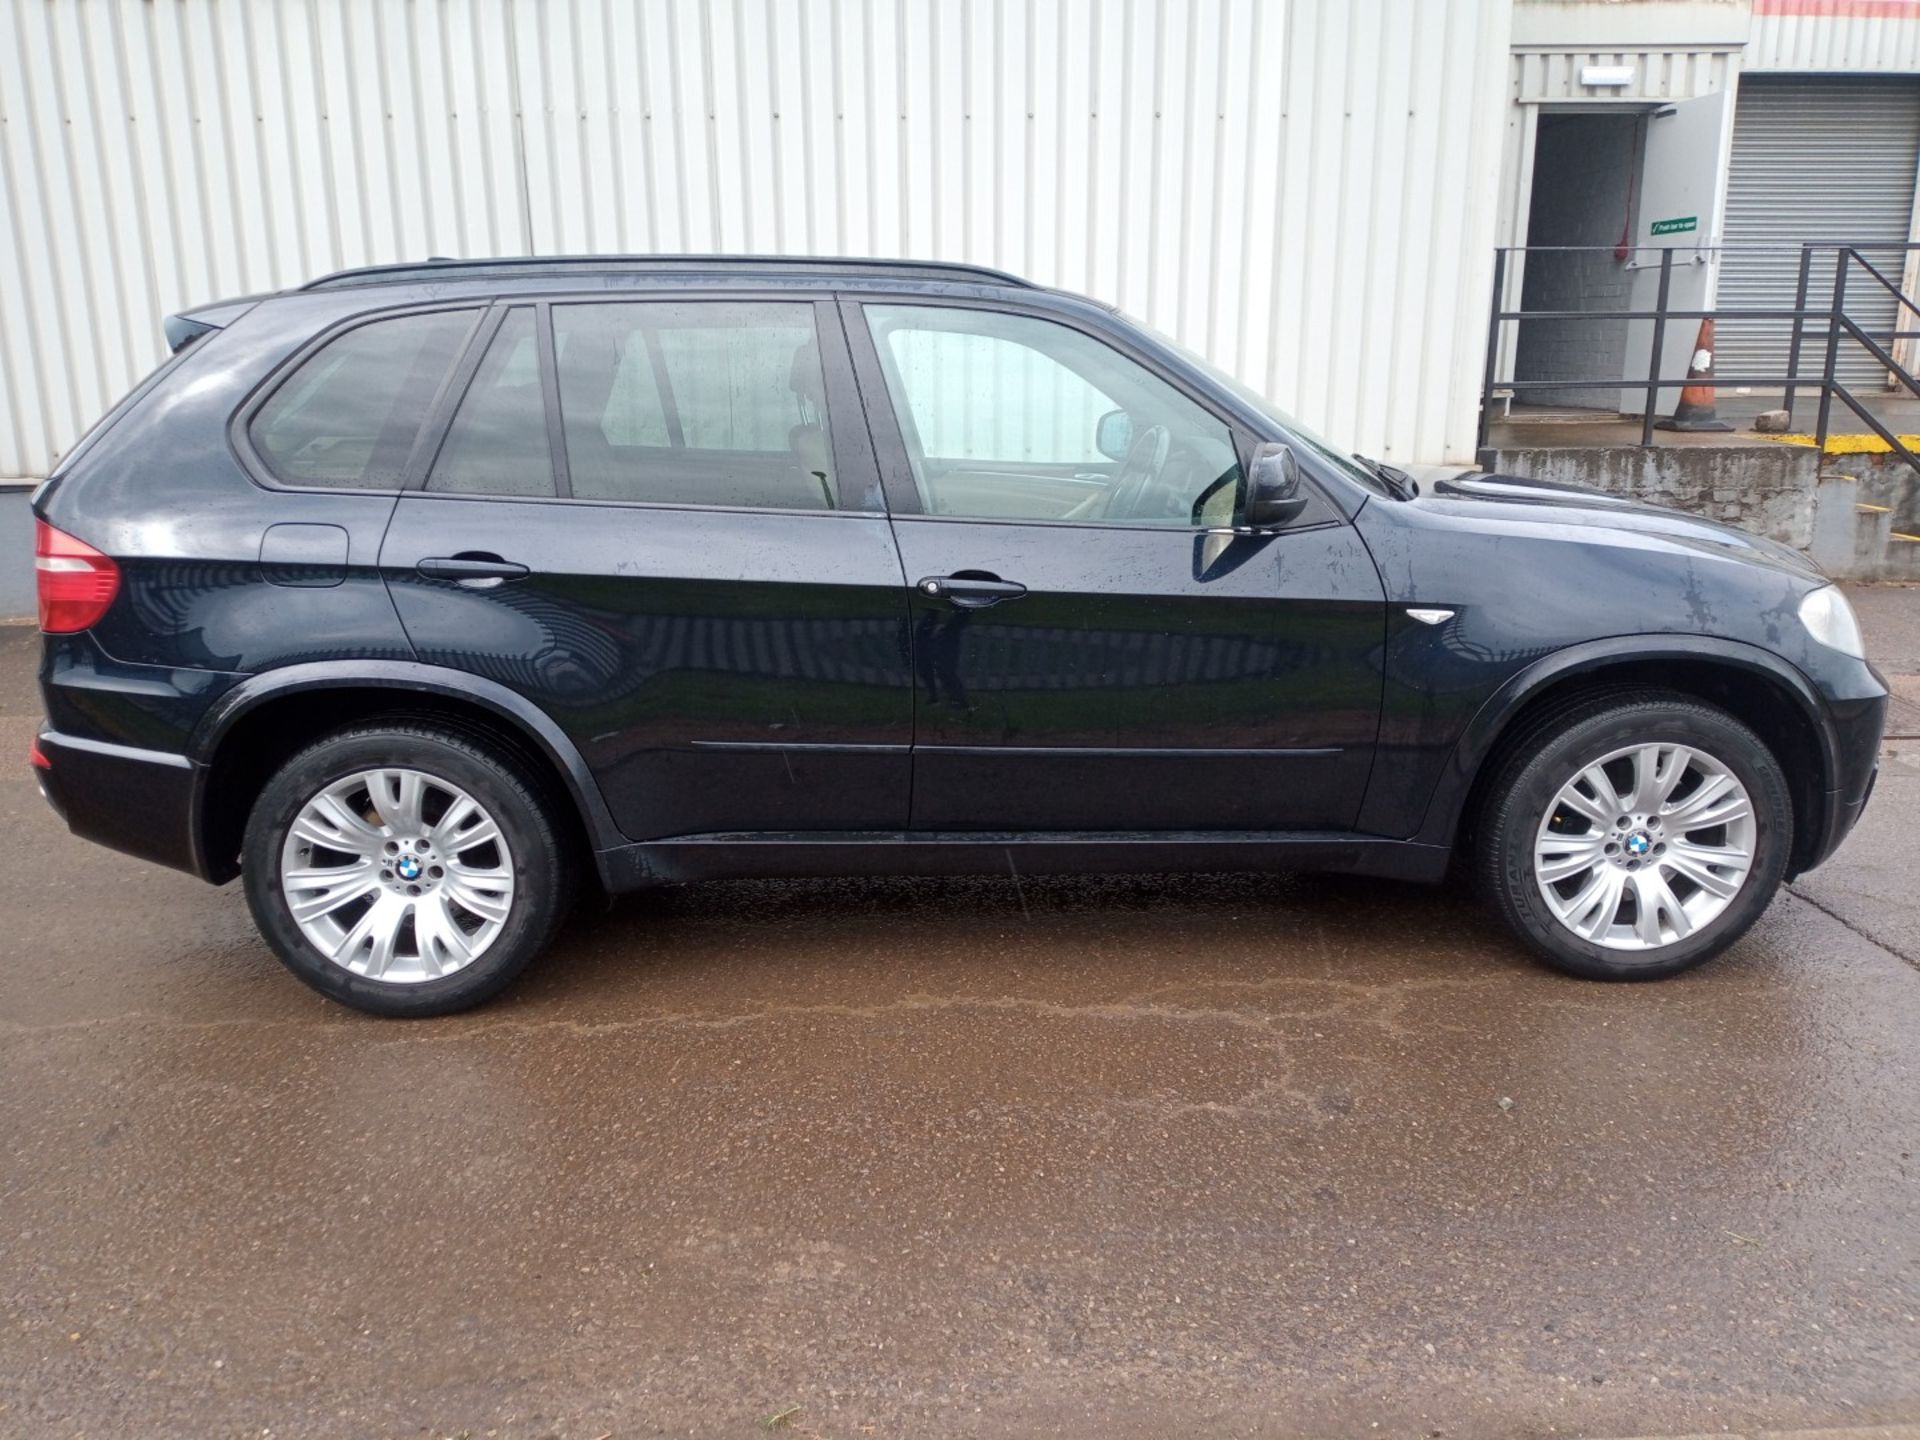 2008 BMW X5 3.0Sd Auto XDrive Msport SUV - CL505 - NO VAT ON THE HAMMER - Location: Corby, Northampt - Image 5 of 19